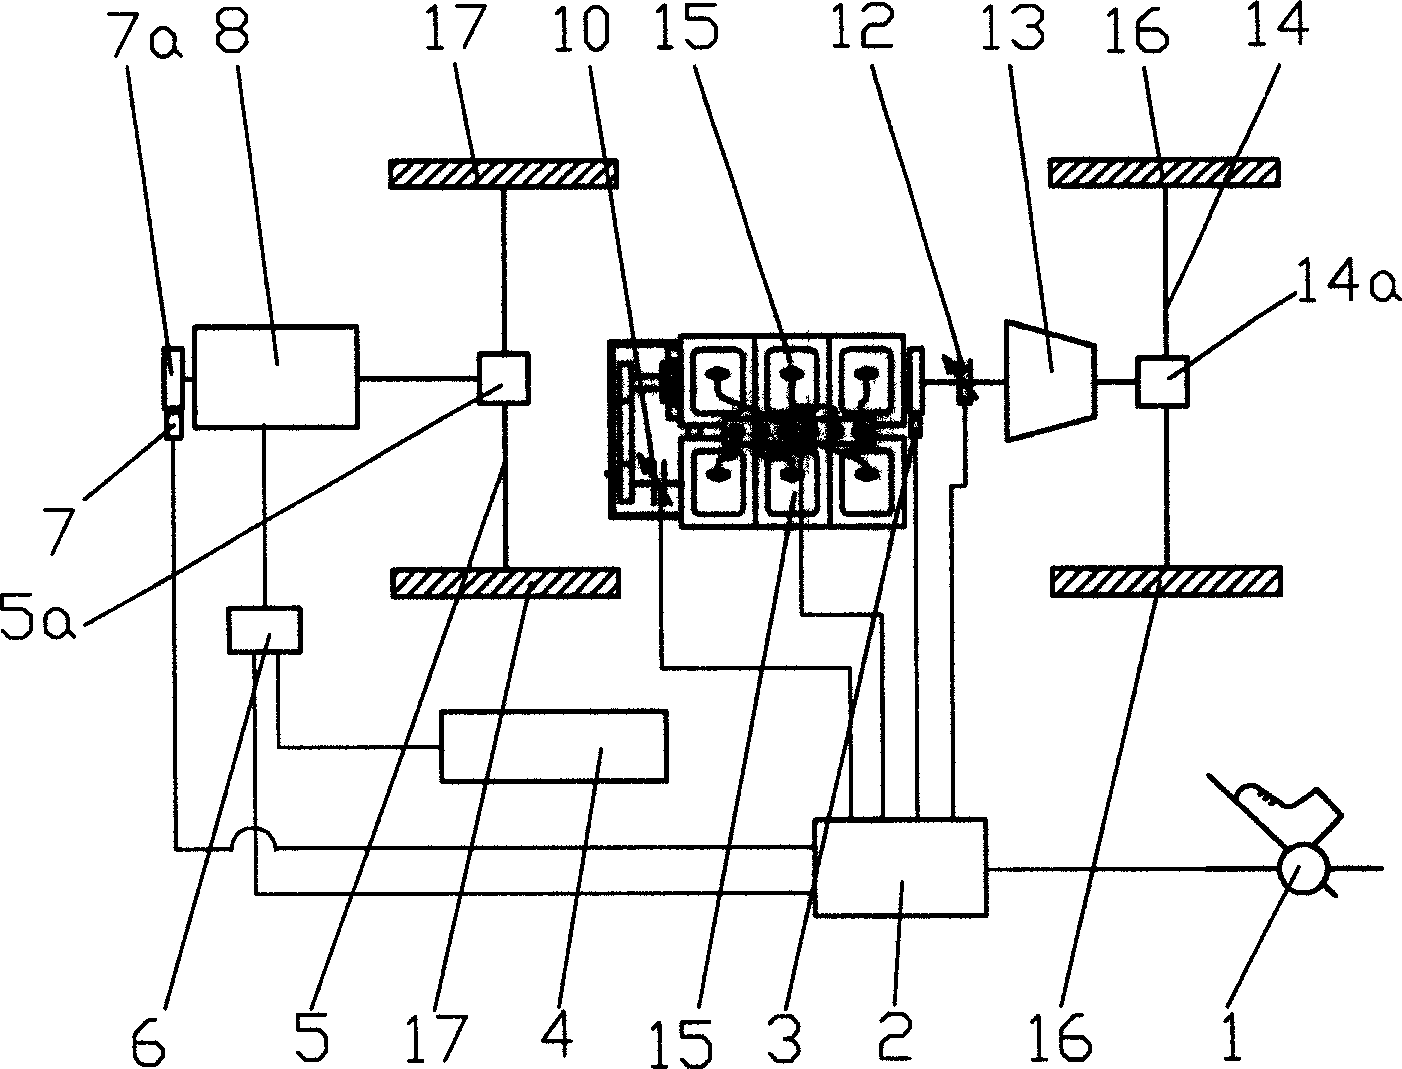 Parallel connection type hybrid power system